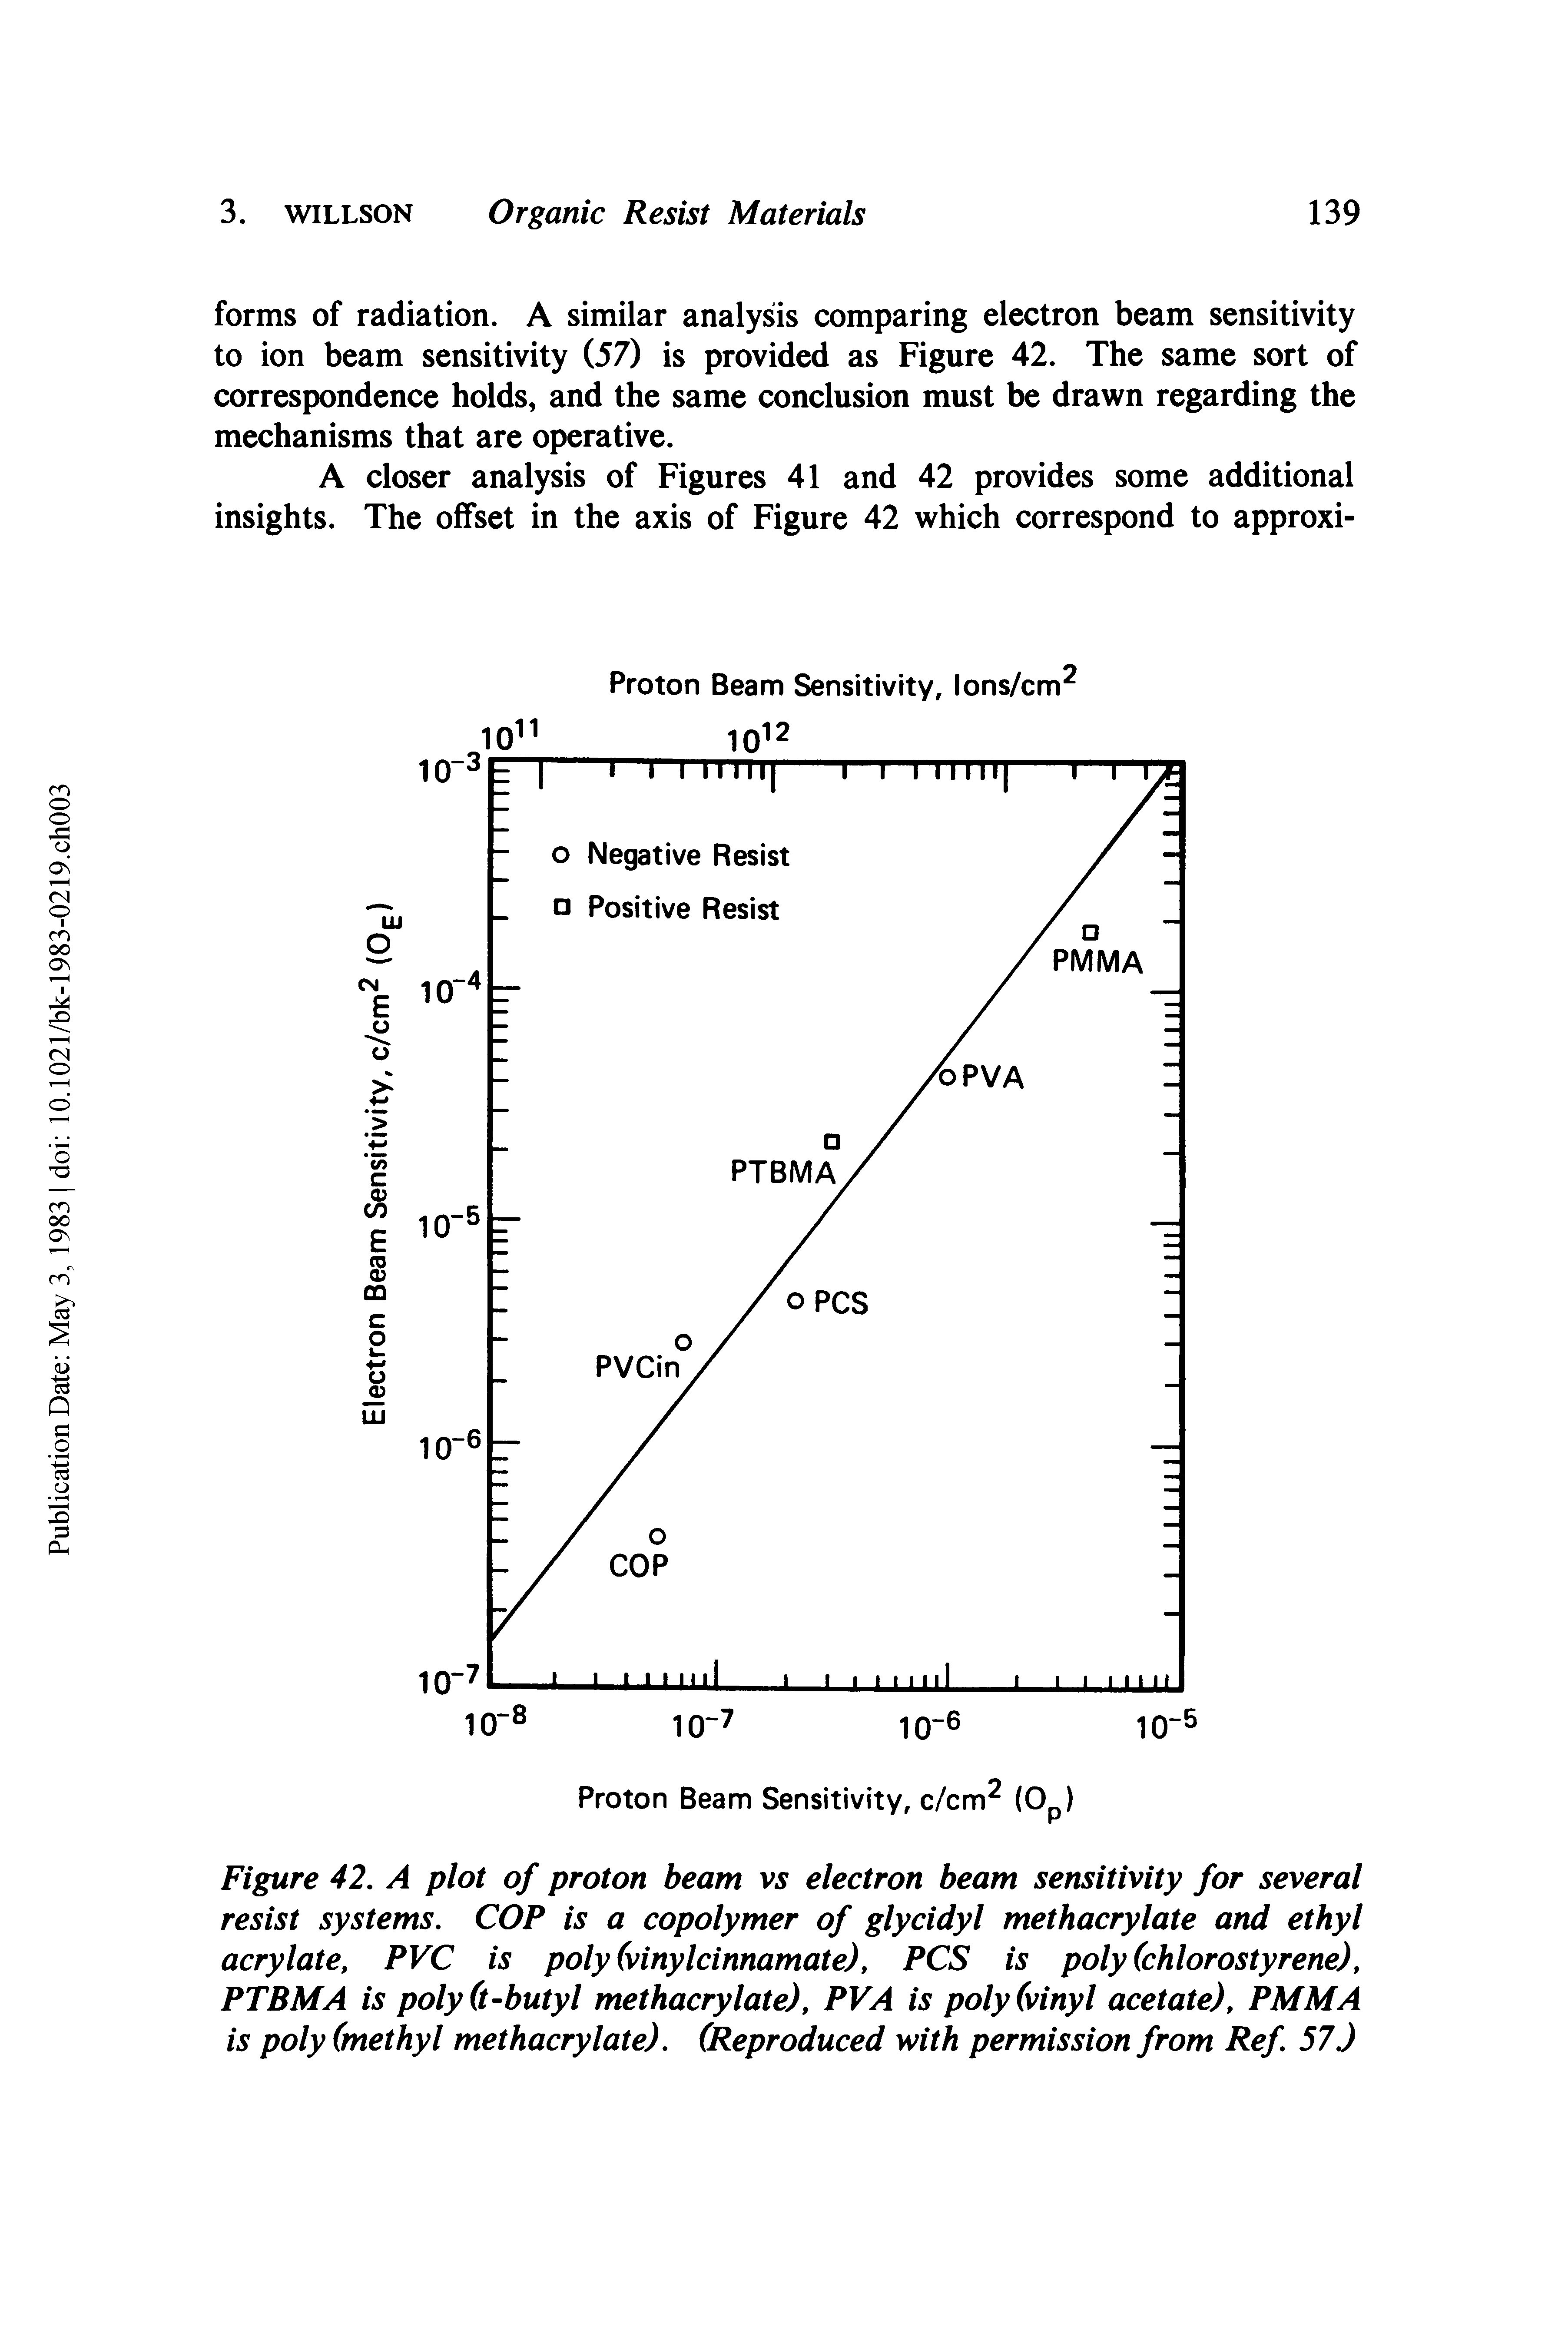 Figure 42. A plot of proton beam vs electron beam sensitivity for several resist systems. COP is a copolymer of glycidyl methacrylate and ethyl acrylate, PVC is poly (vinylcinnamate), PCS is poly (chlorostyrene), PTBMA is polyO-butyl methacrylate), PVA is poly (vinyl acetate), PMMA is poly (methyl methacrylate). (Reproduced with permission from Ref. 57 J...